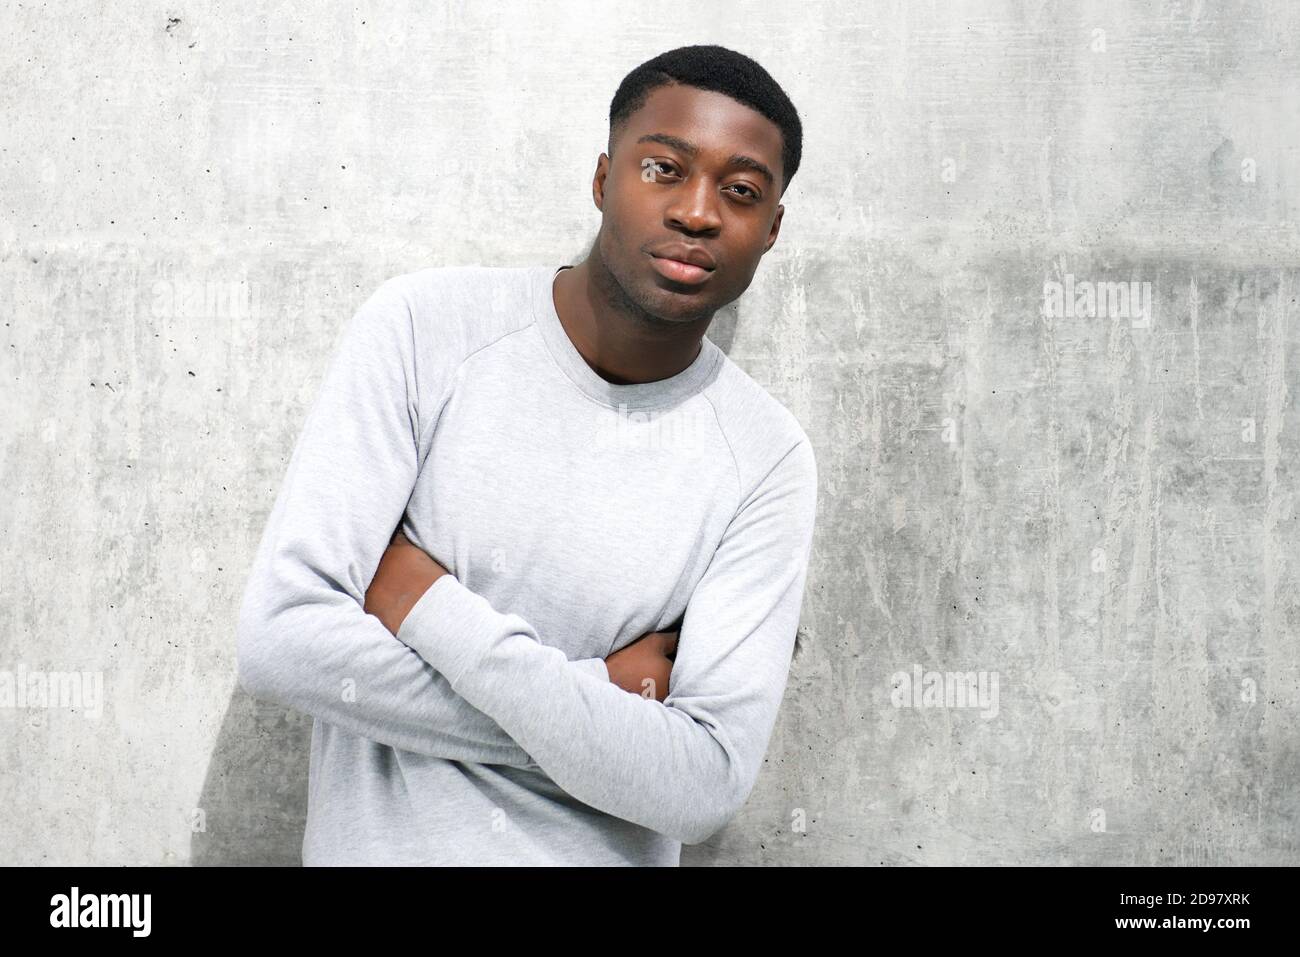 portrait-of-cool-young-black-man-posing-with-arms-crossed-against-gray-wall-2D97XRK.jpg